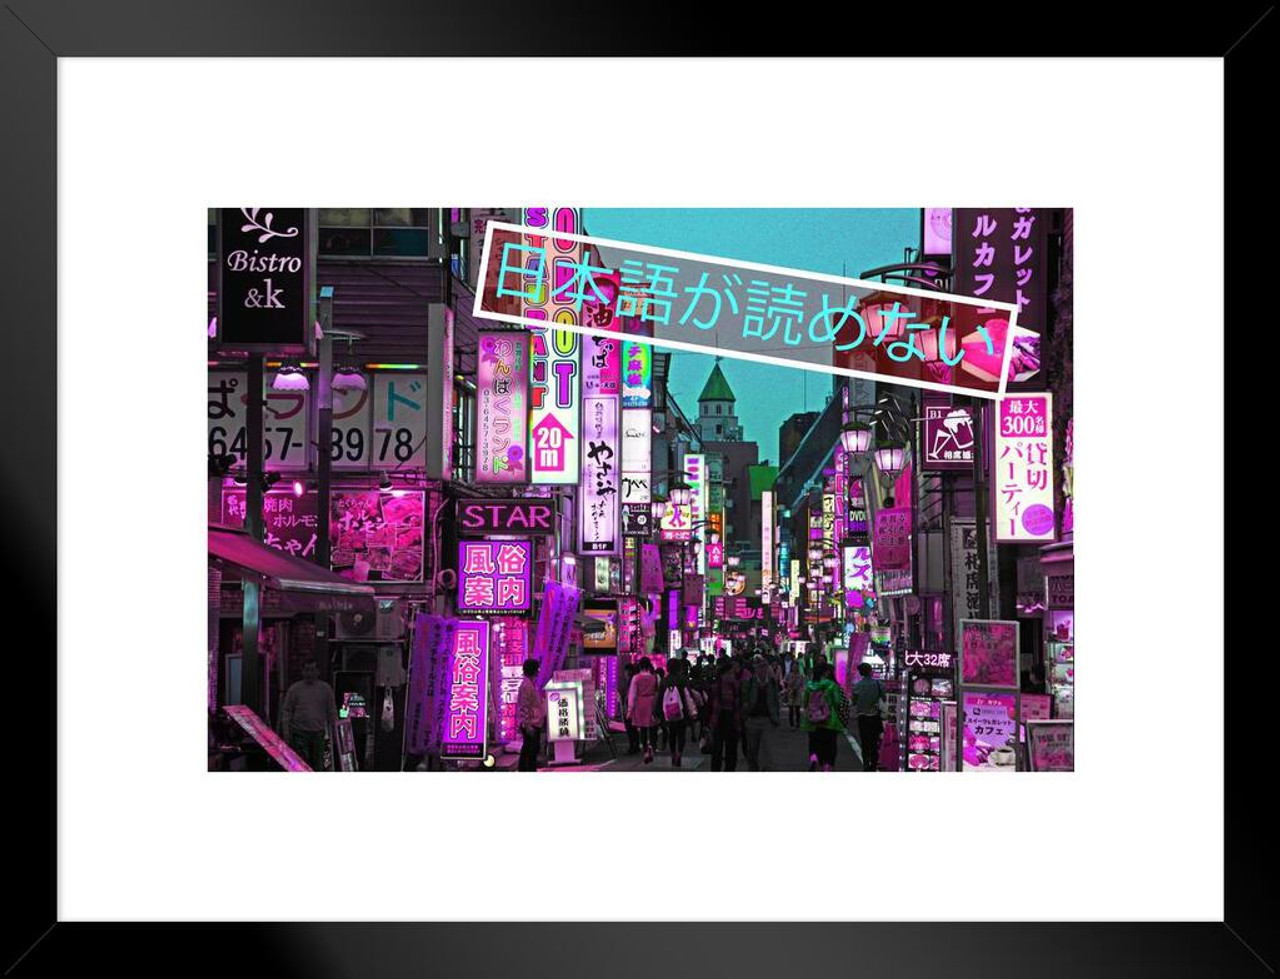 Can't Read Japanese Japan Alley Photo Vaporwave Aesthetic Decor Retro  Vintage 90s Y2K Room Decor Neon Pink Bedroom Decor Indie Vibey Aesthetic